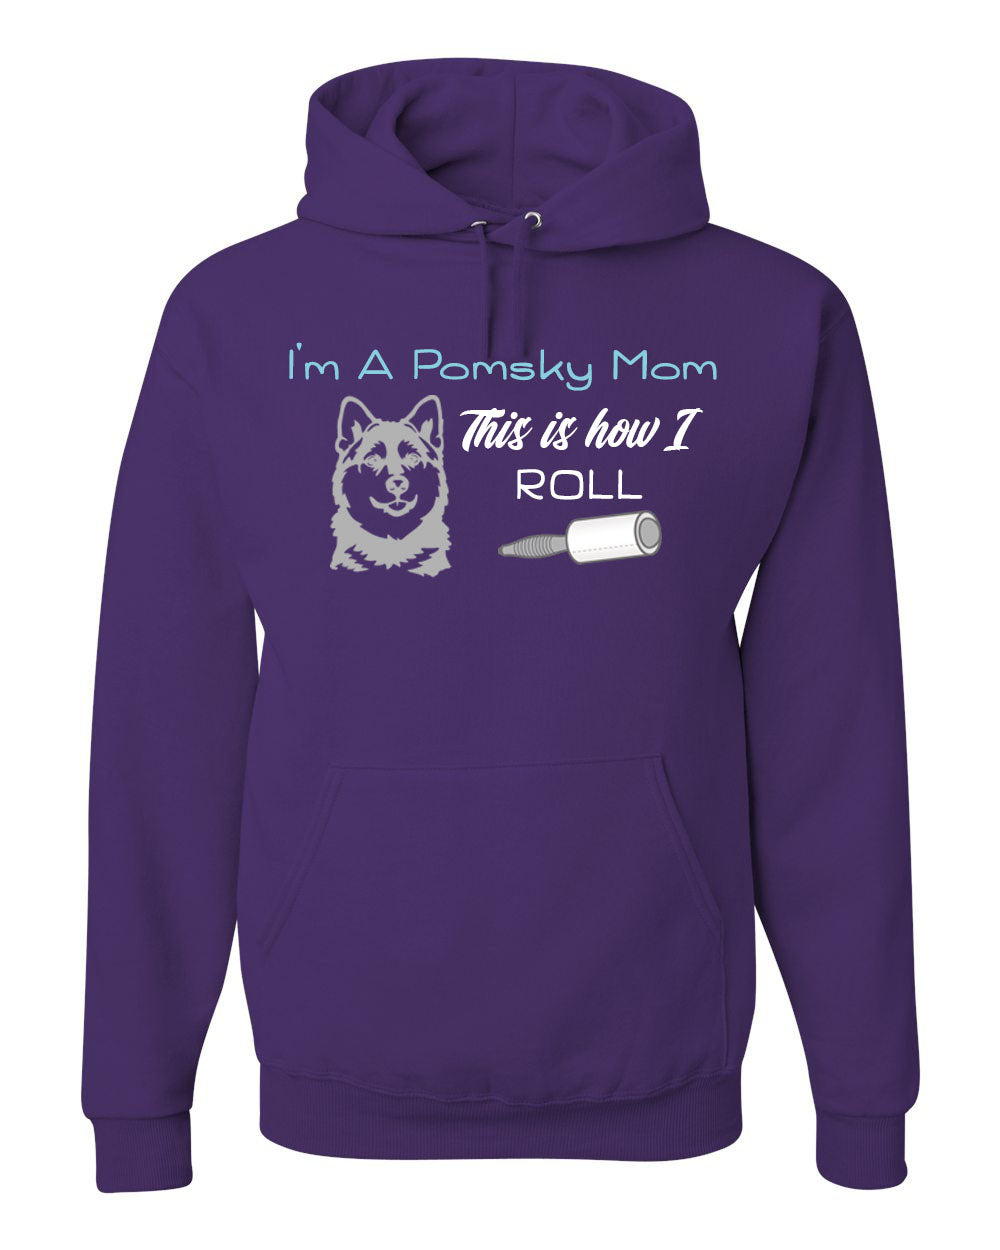 This is how I roll Hooded Sweatshirt